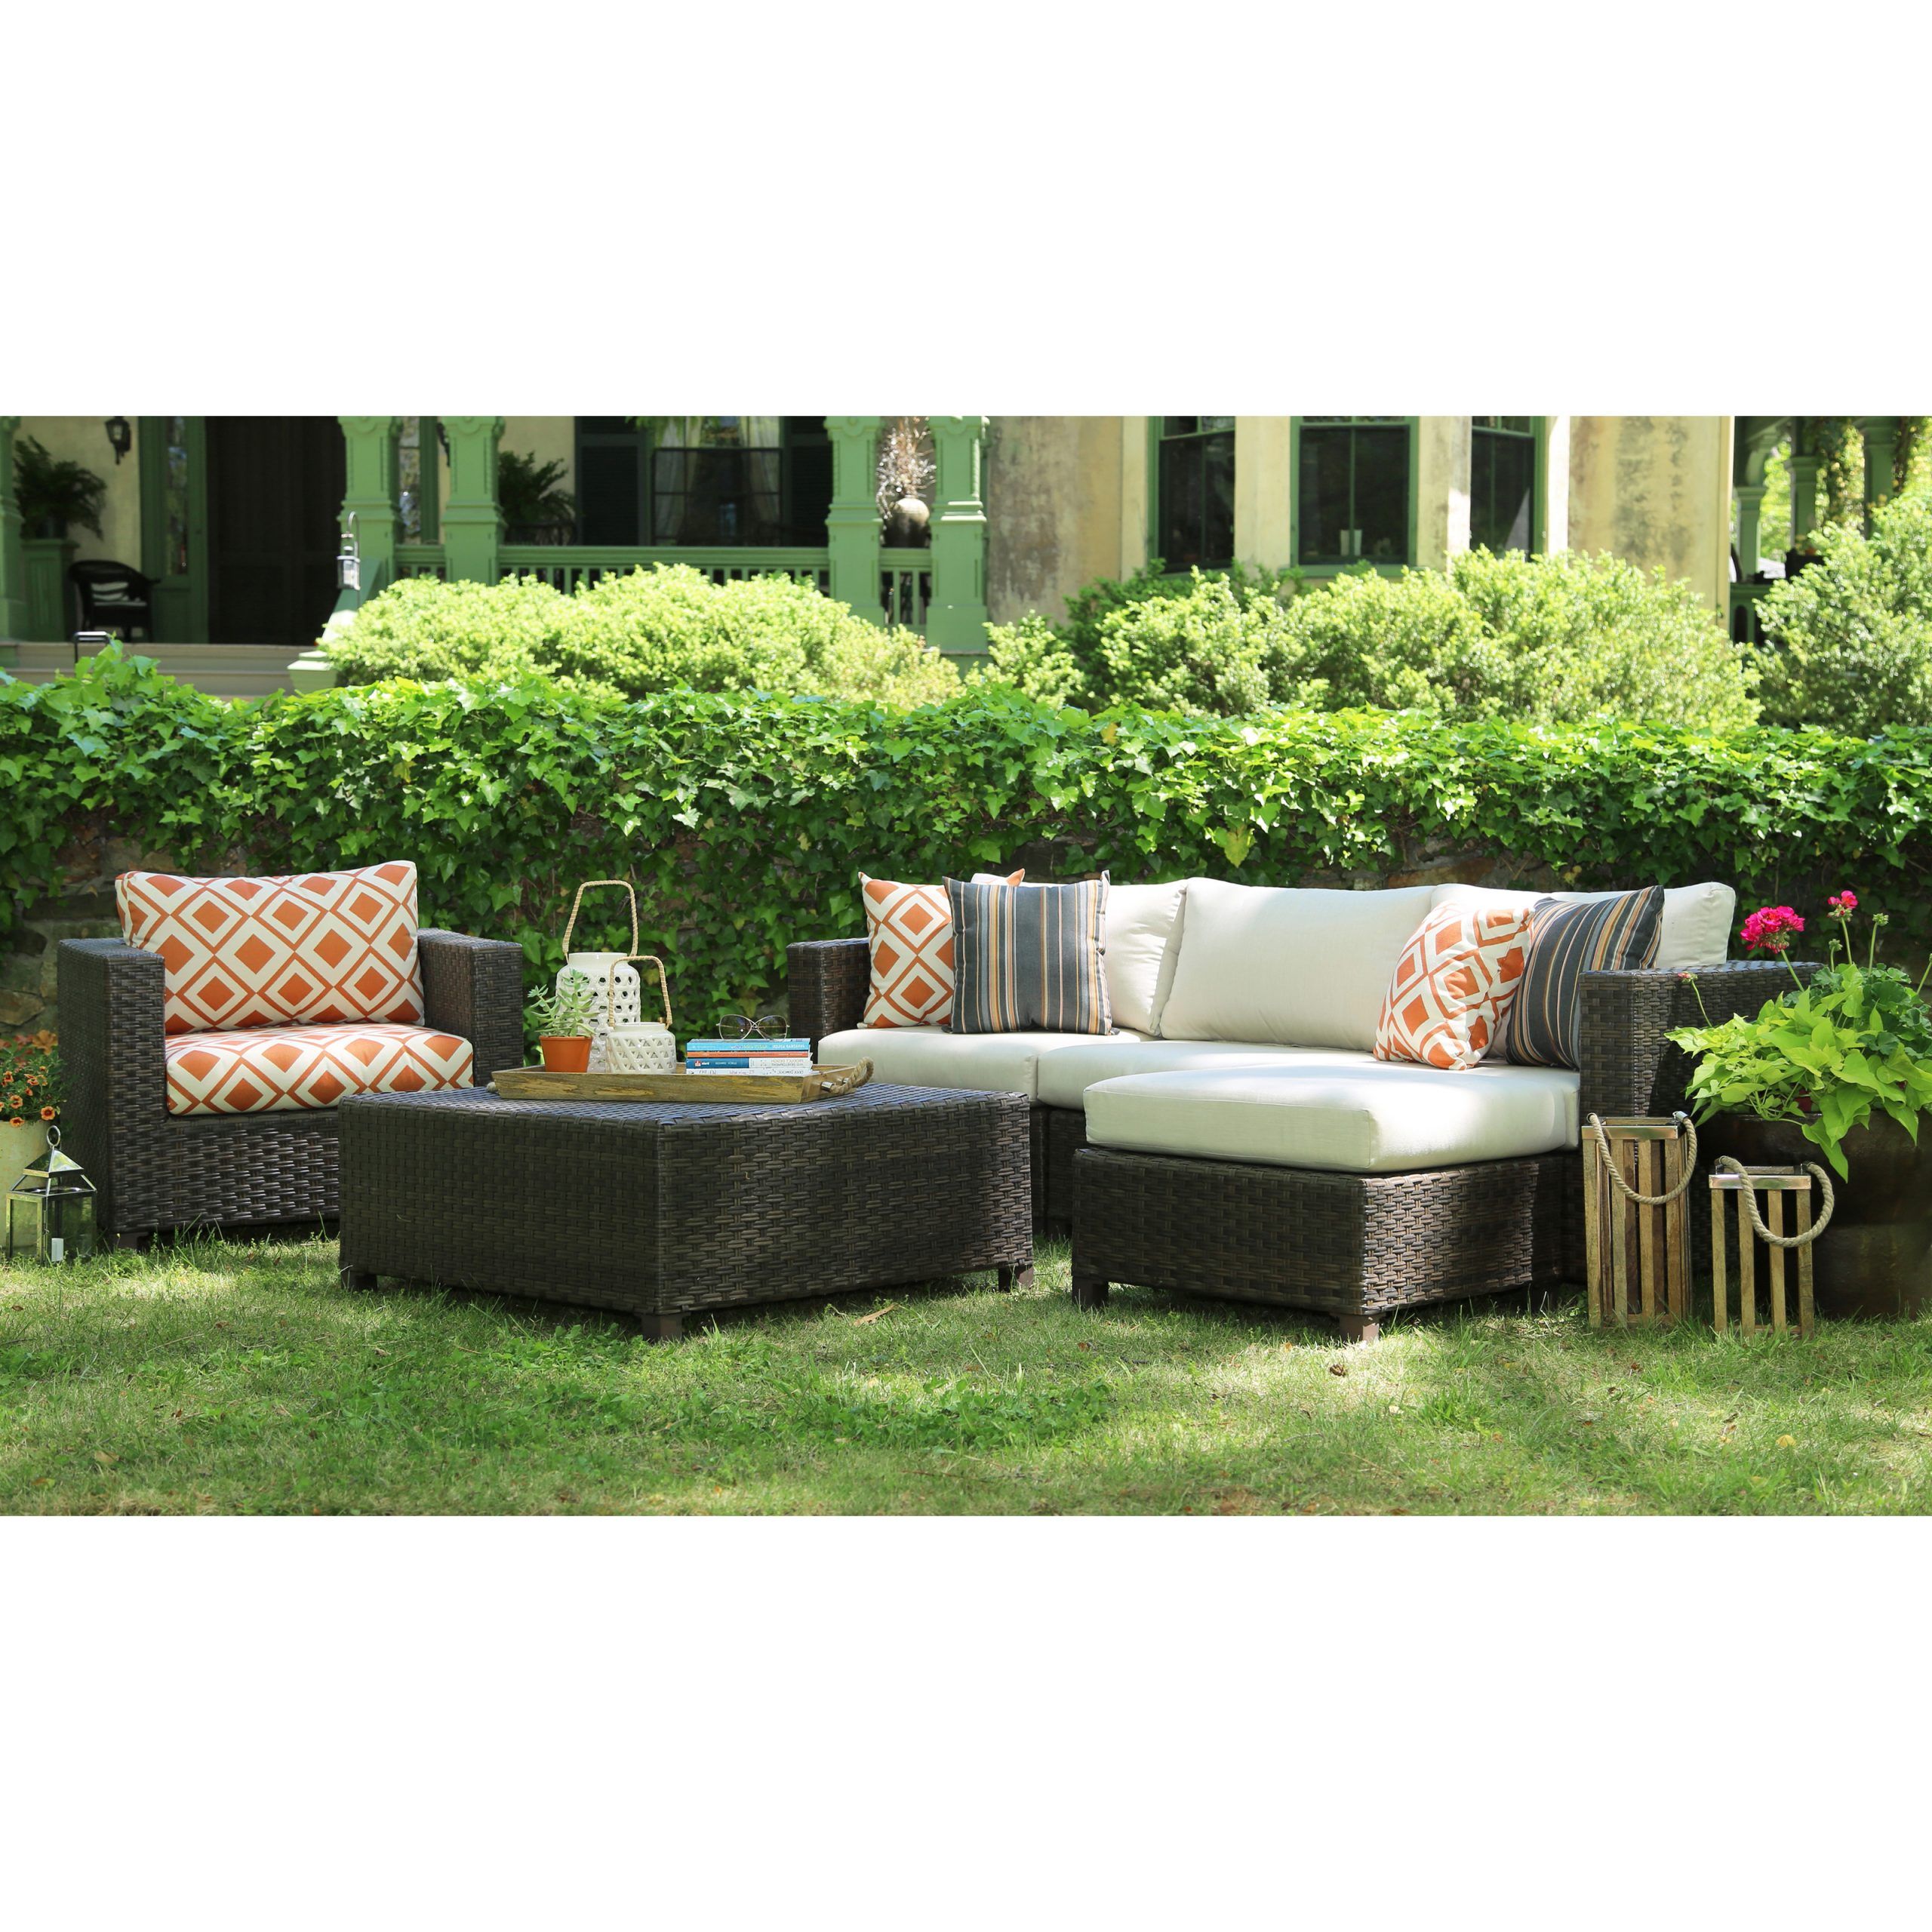 4 Piece Outdoor Seating Patio Sets Throughout Well Liked Ae Outdoor Biscayne 4 Piece Deep Seating Conversation Set (View 6 of 15)